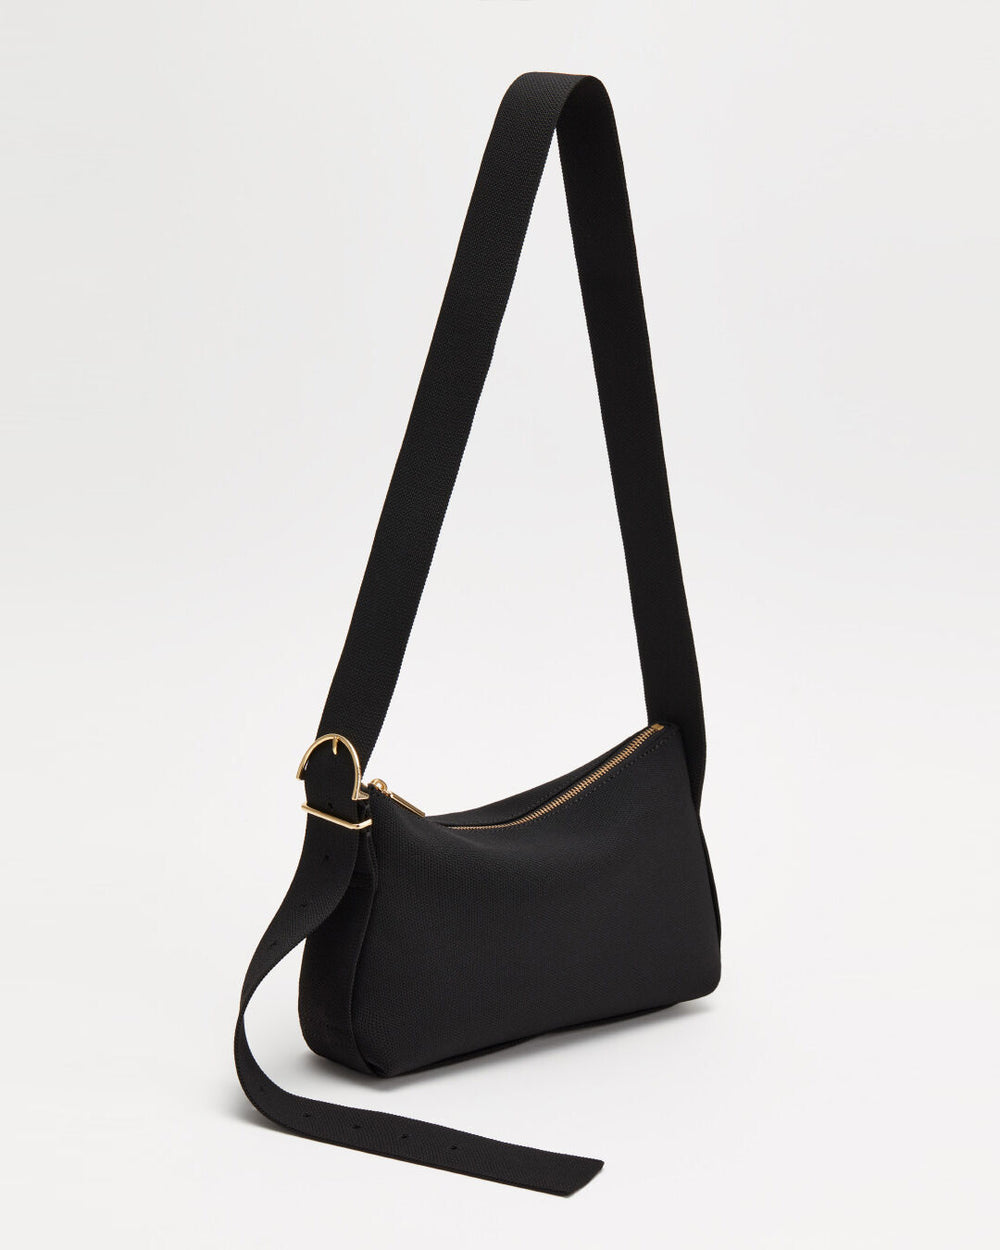 Small shoulder bag with a long strap and gold-tone hardware.